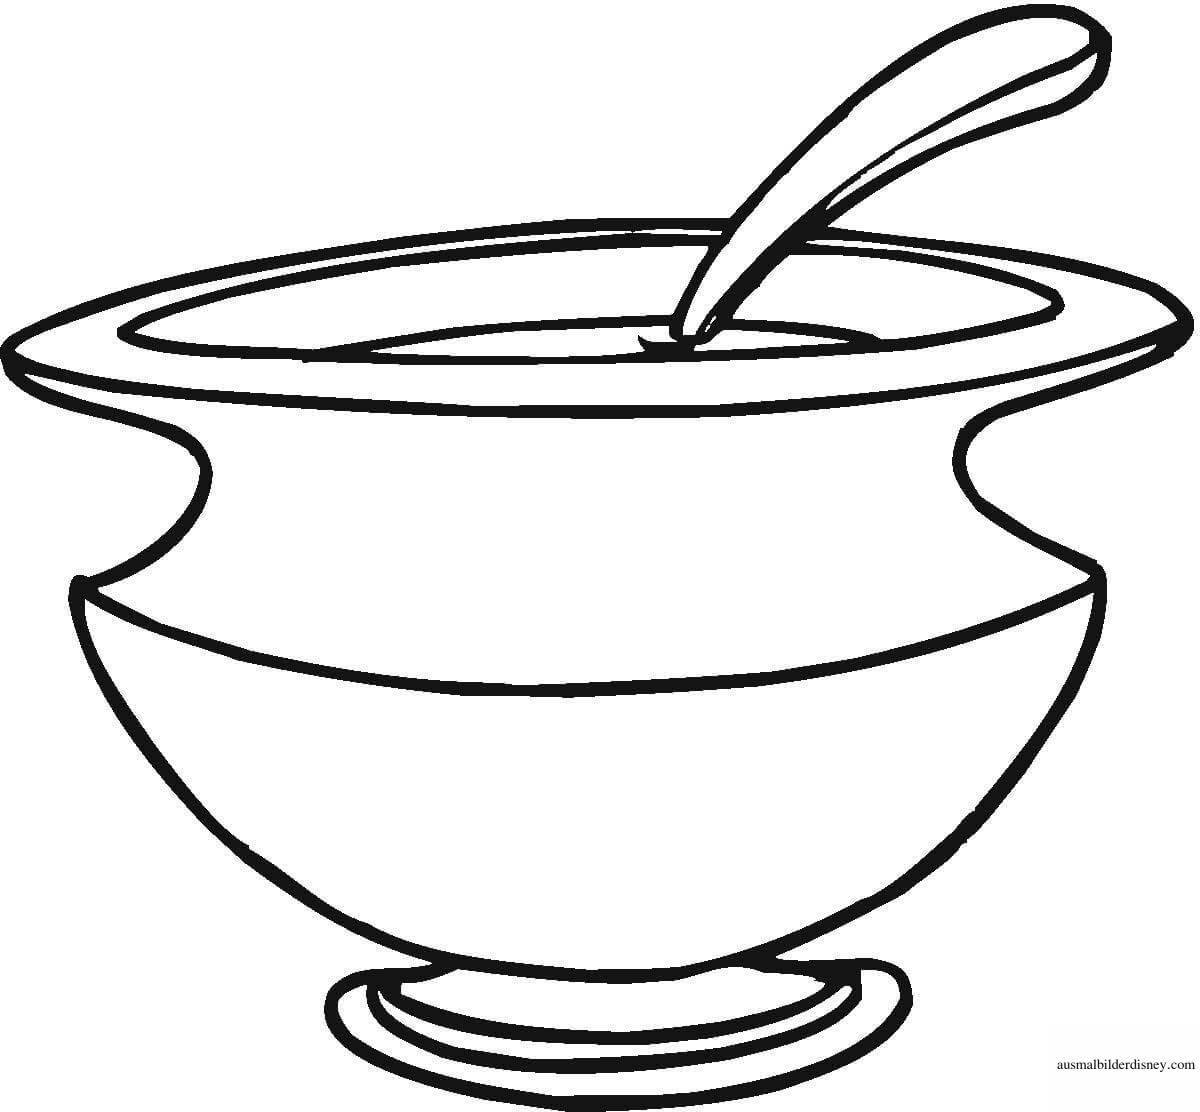 Junior Glowing Bowl Coloring Page